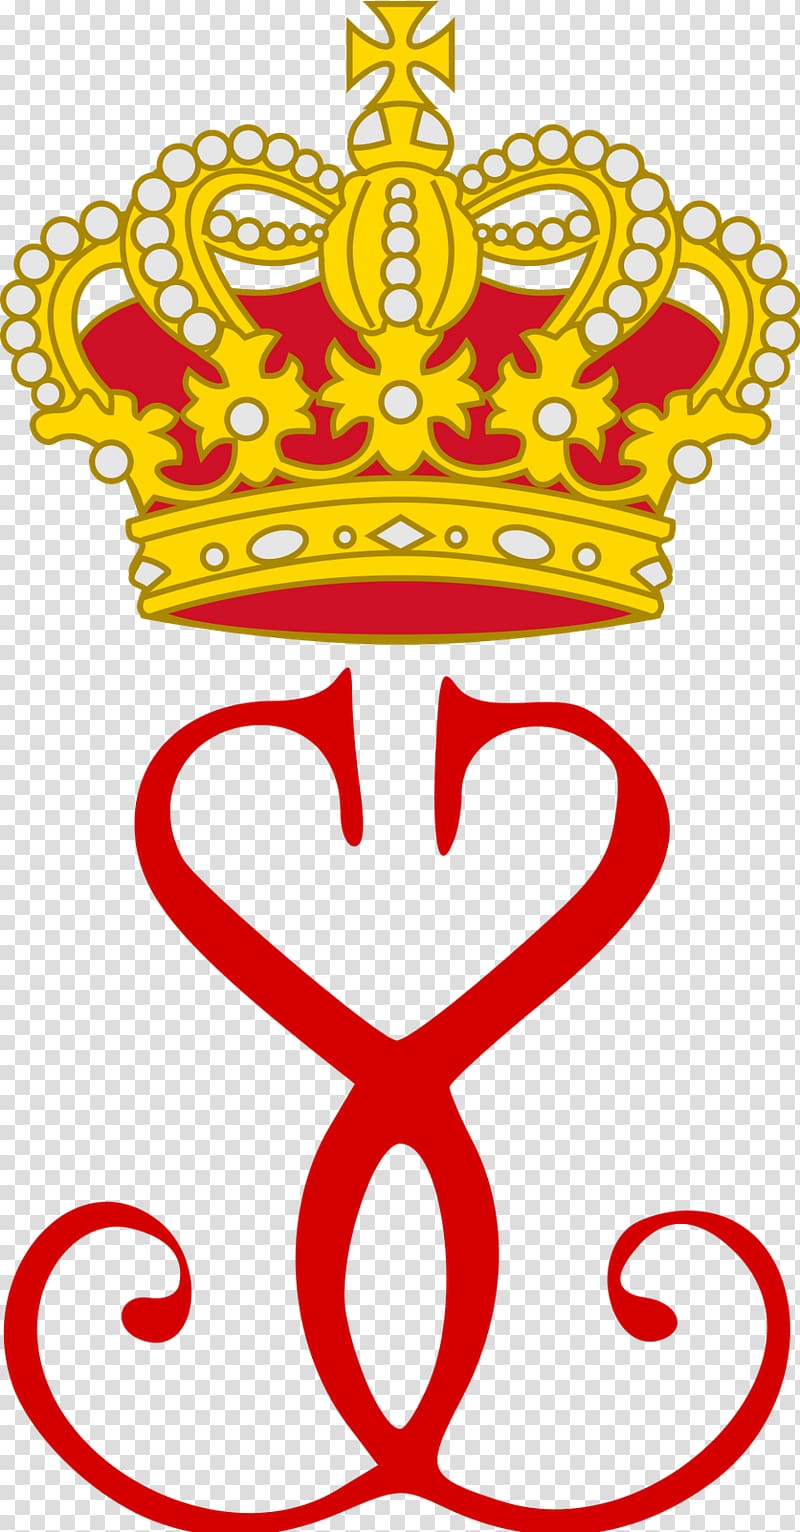 Prince\'s Palace of Monaco Monogram Royal cypher Coat of arms Hassana Royal, Royal Television Society transparent background PNG clipart